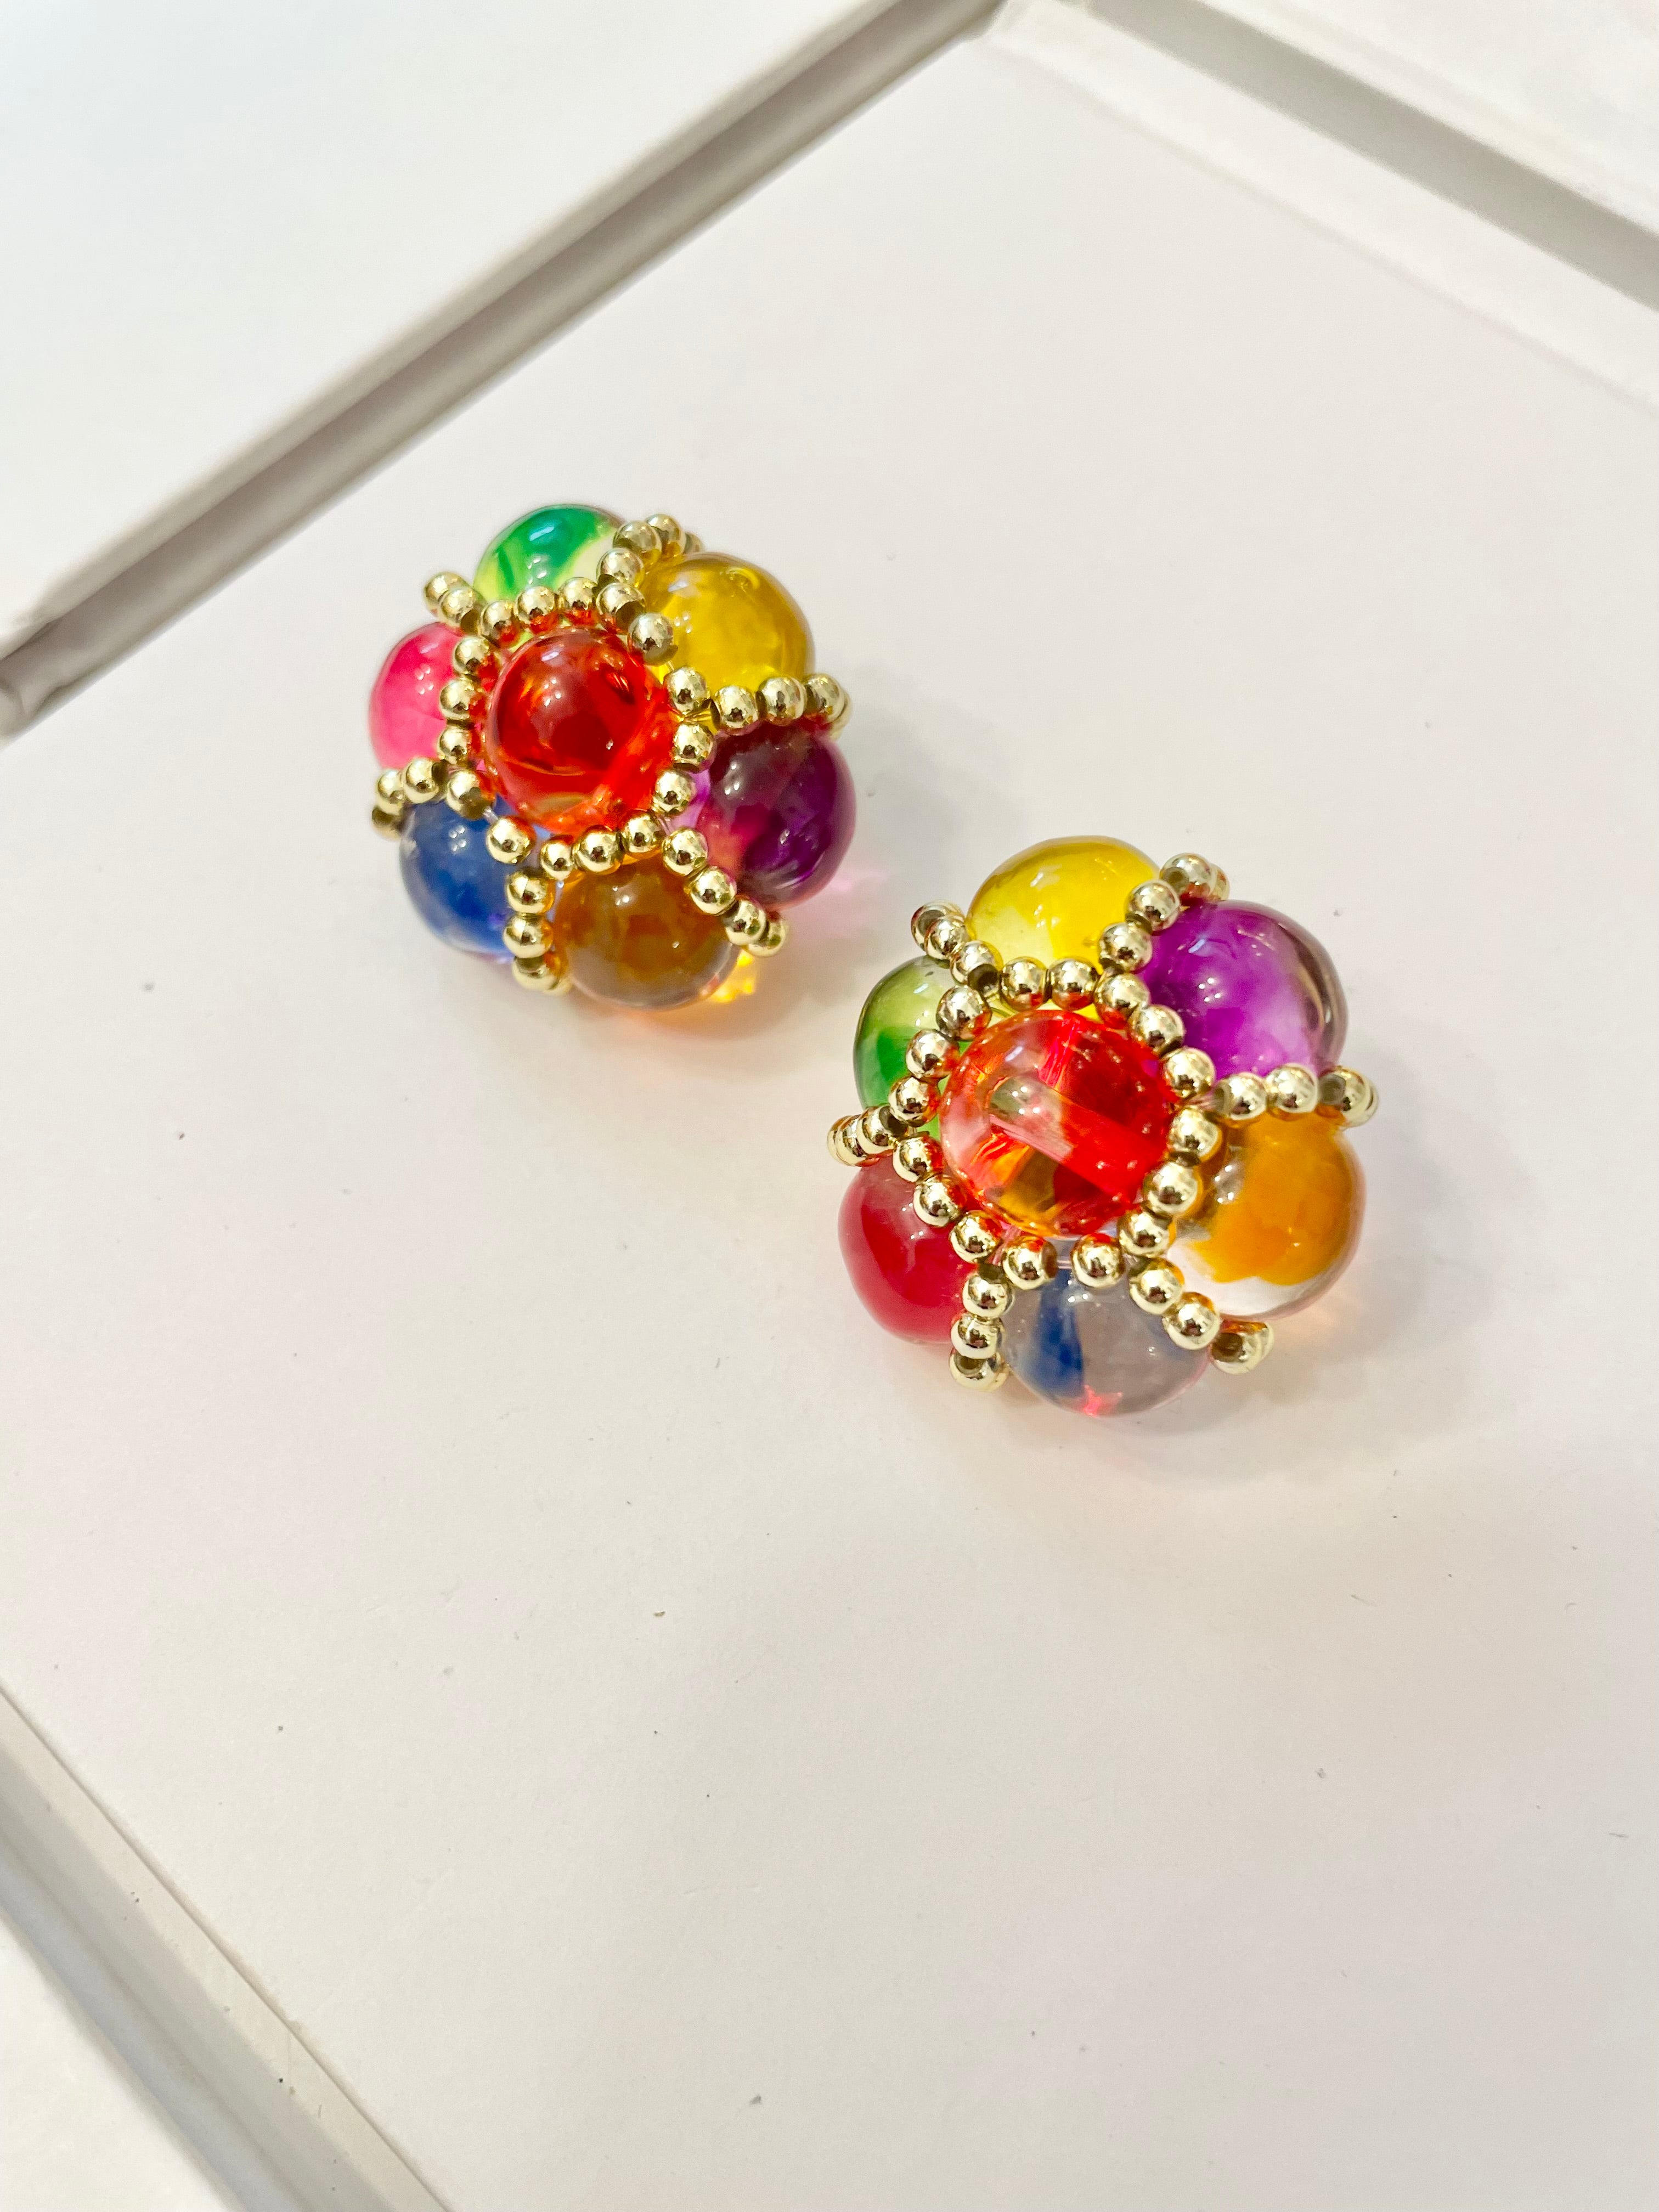 The lady loves nothing more than colorful earrings....so pretty